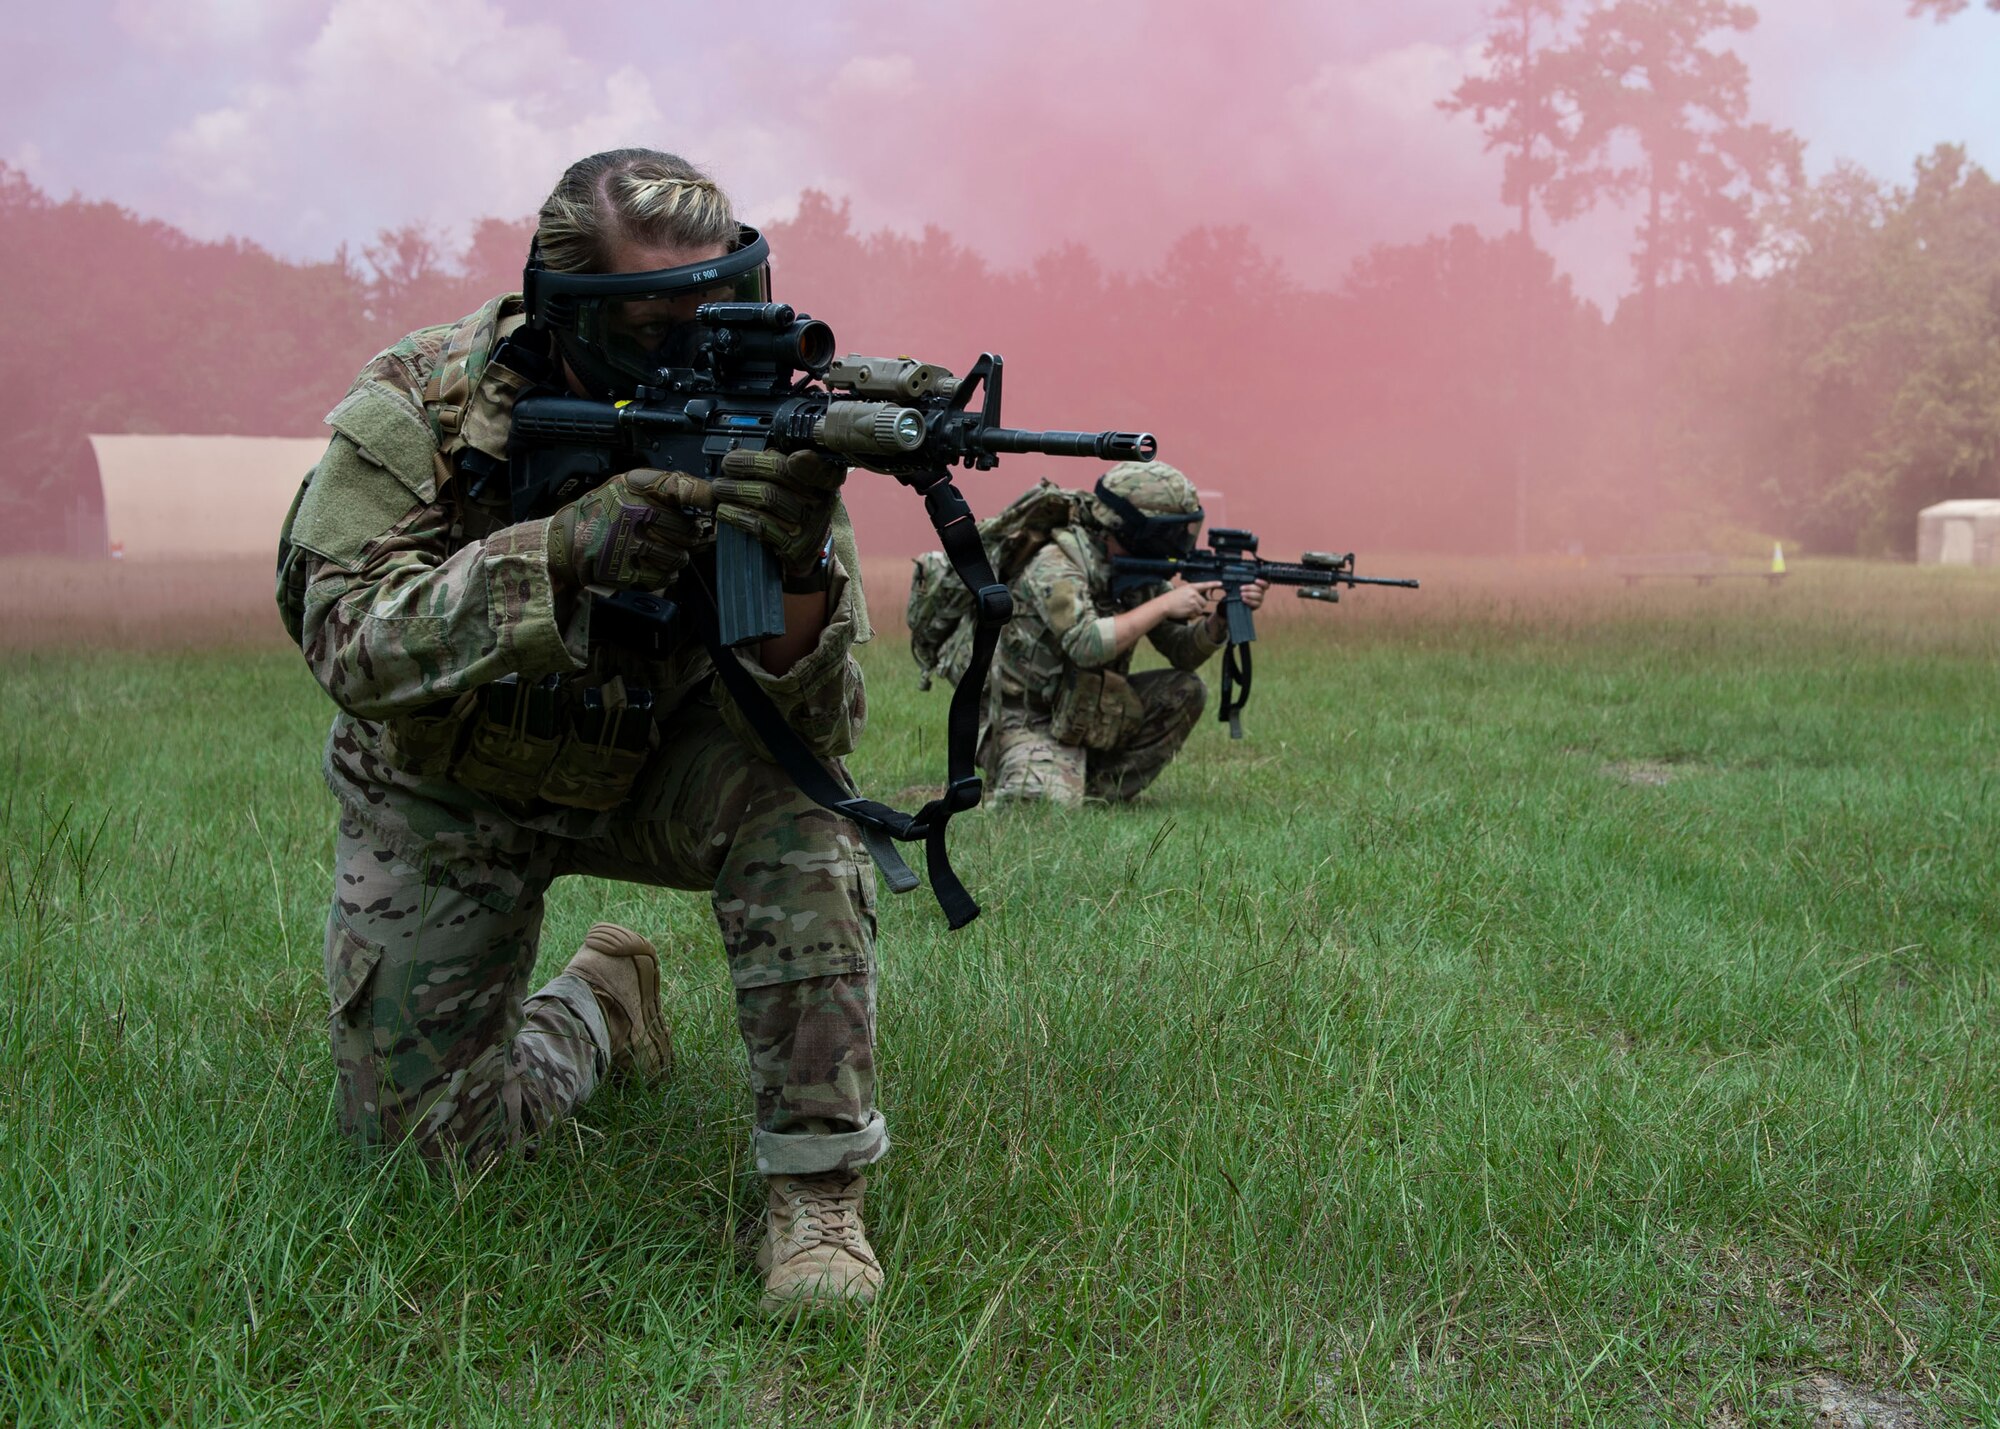 Staff Sgt. Miranda Roberts, 824th Base Defense Squadron fire team leader, aims down her sight during the Tactical Leaders Course, Aug. 10, 2019, at Moody Air Force Base, Ga. The 7-day course revolved around squad leaders developing their skills to effectively communicate, team build and mission plan. These skills were assessed during a 36-hour simulated operation where squad leaders lead Airmen through tactical situations. (U.S. Air Force photo by Airman Azaria E. Foster)